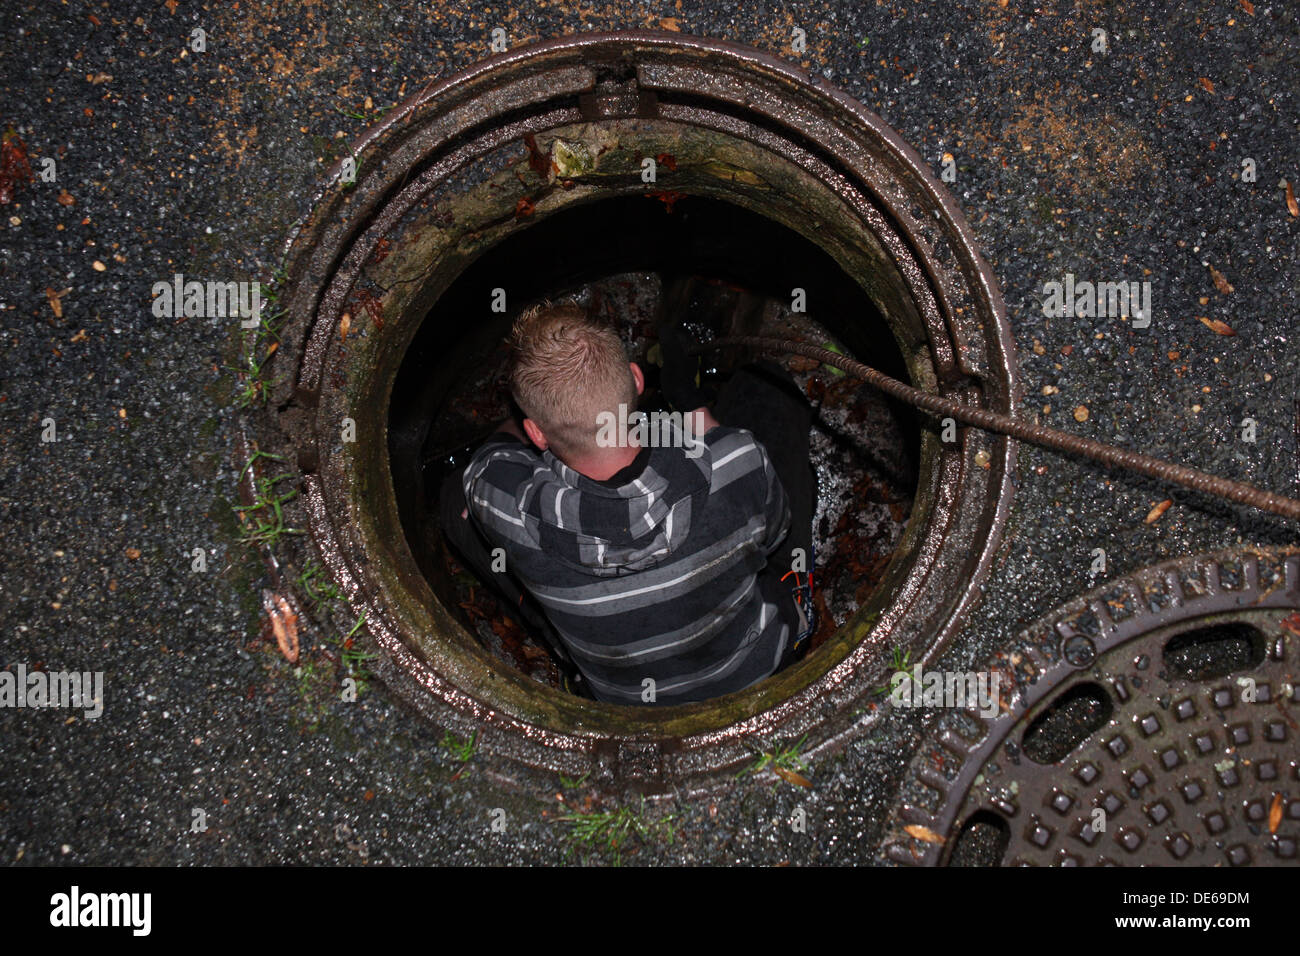 Berlin, Germany, man working without protective clothing in a manhole Stock Photo